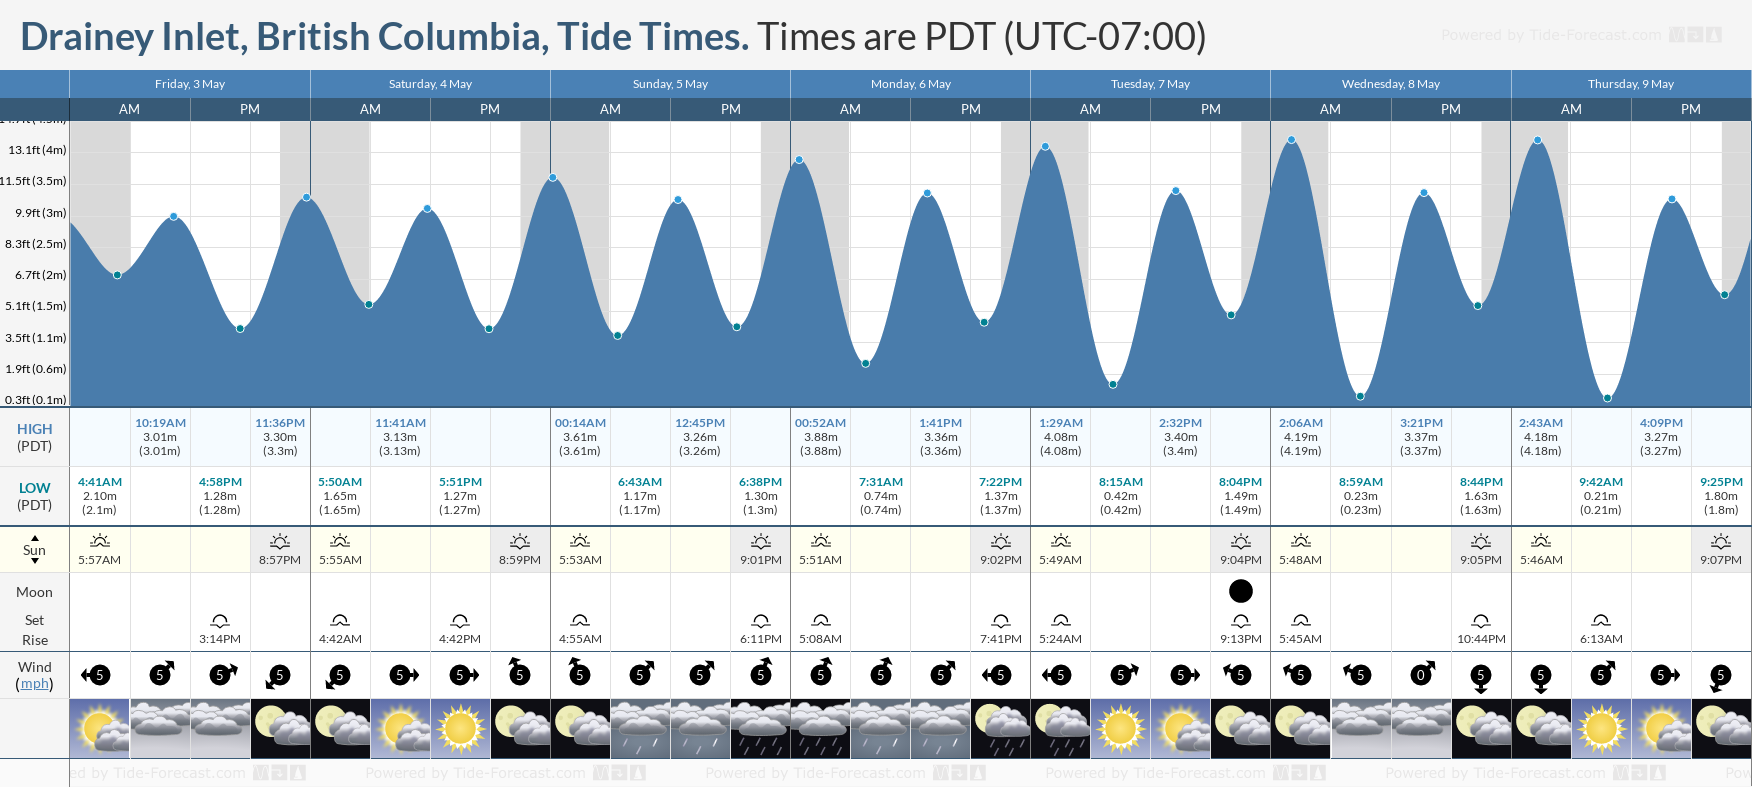 Drainey Inlet, British Columbia Tide Chart including high and low tide tide times for the next 7 days